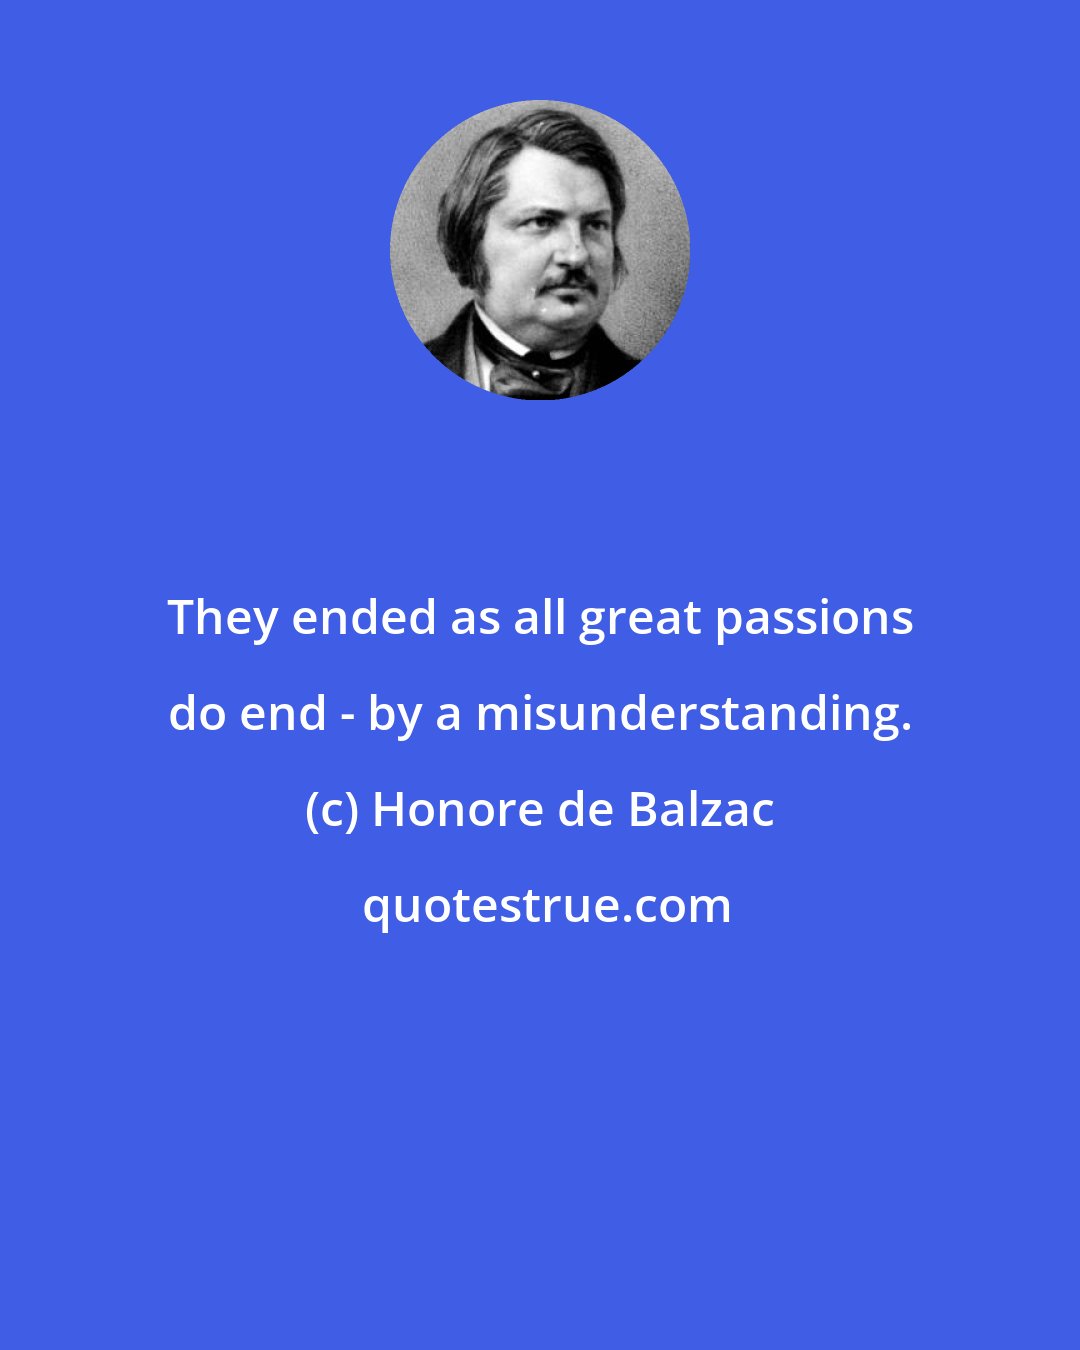 Honore de Balzac: They ended as all great passions do end - by a misunderstanding.